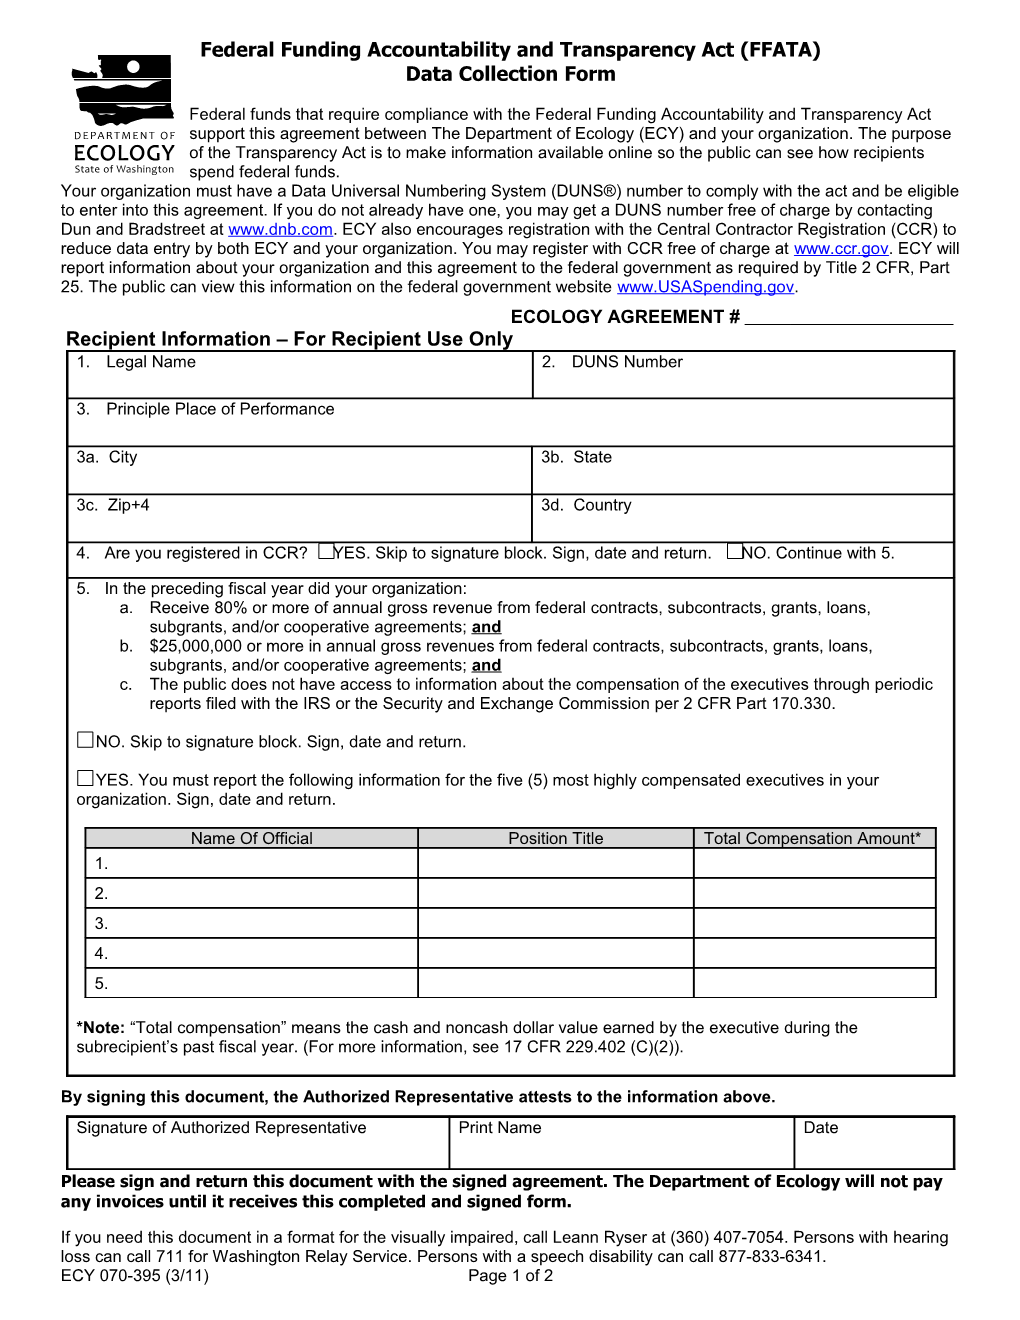 Federal Funding Accountability and Transparency Act (FFATA) Request Form